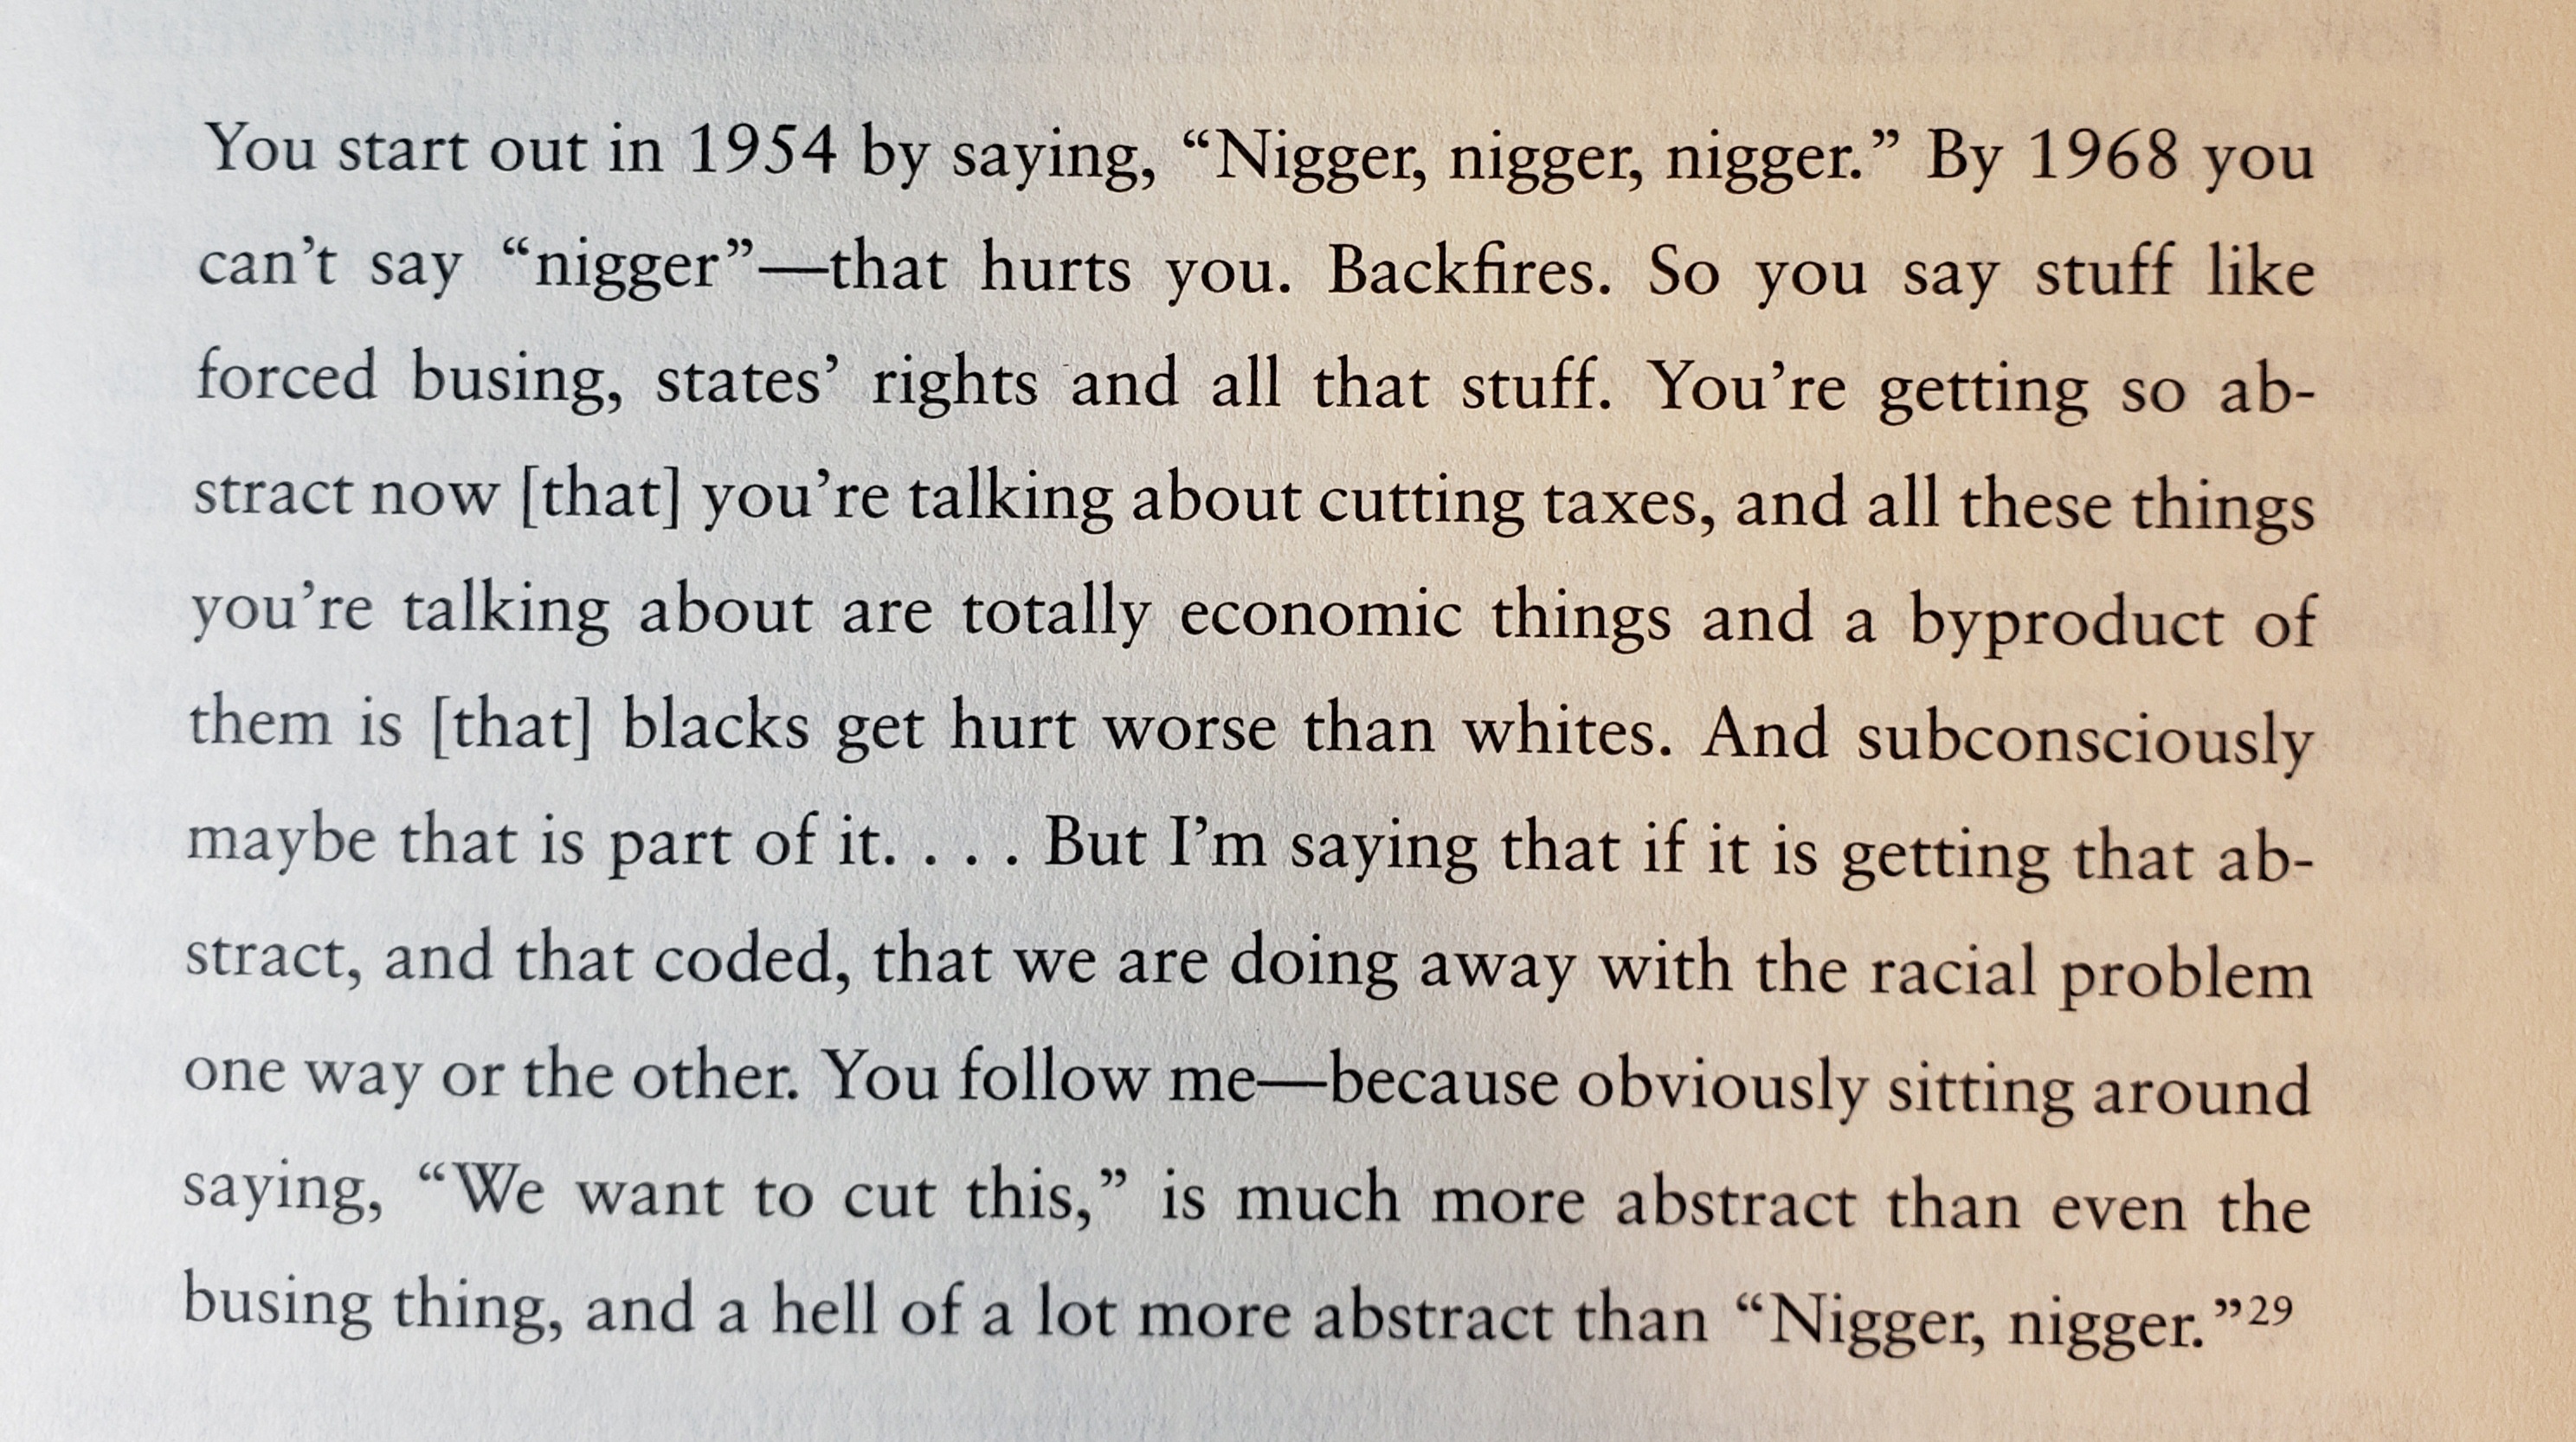 Lee Atwater explains the Southern Strategy